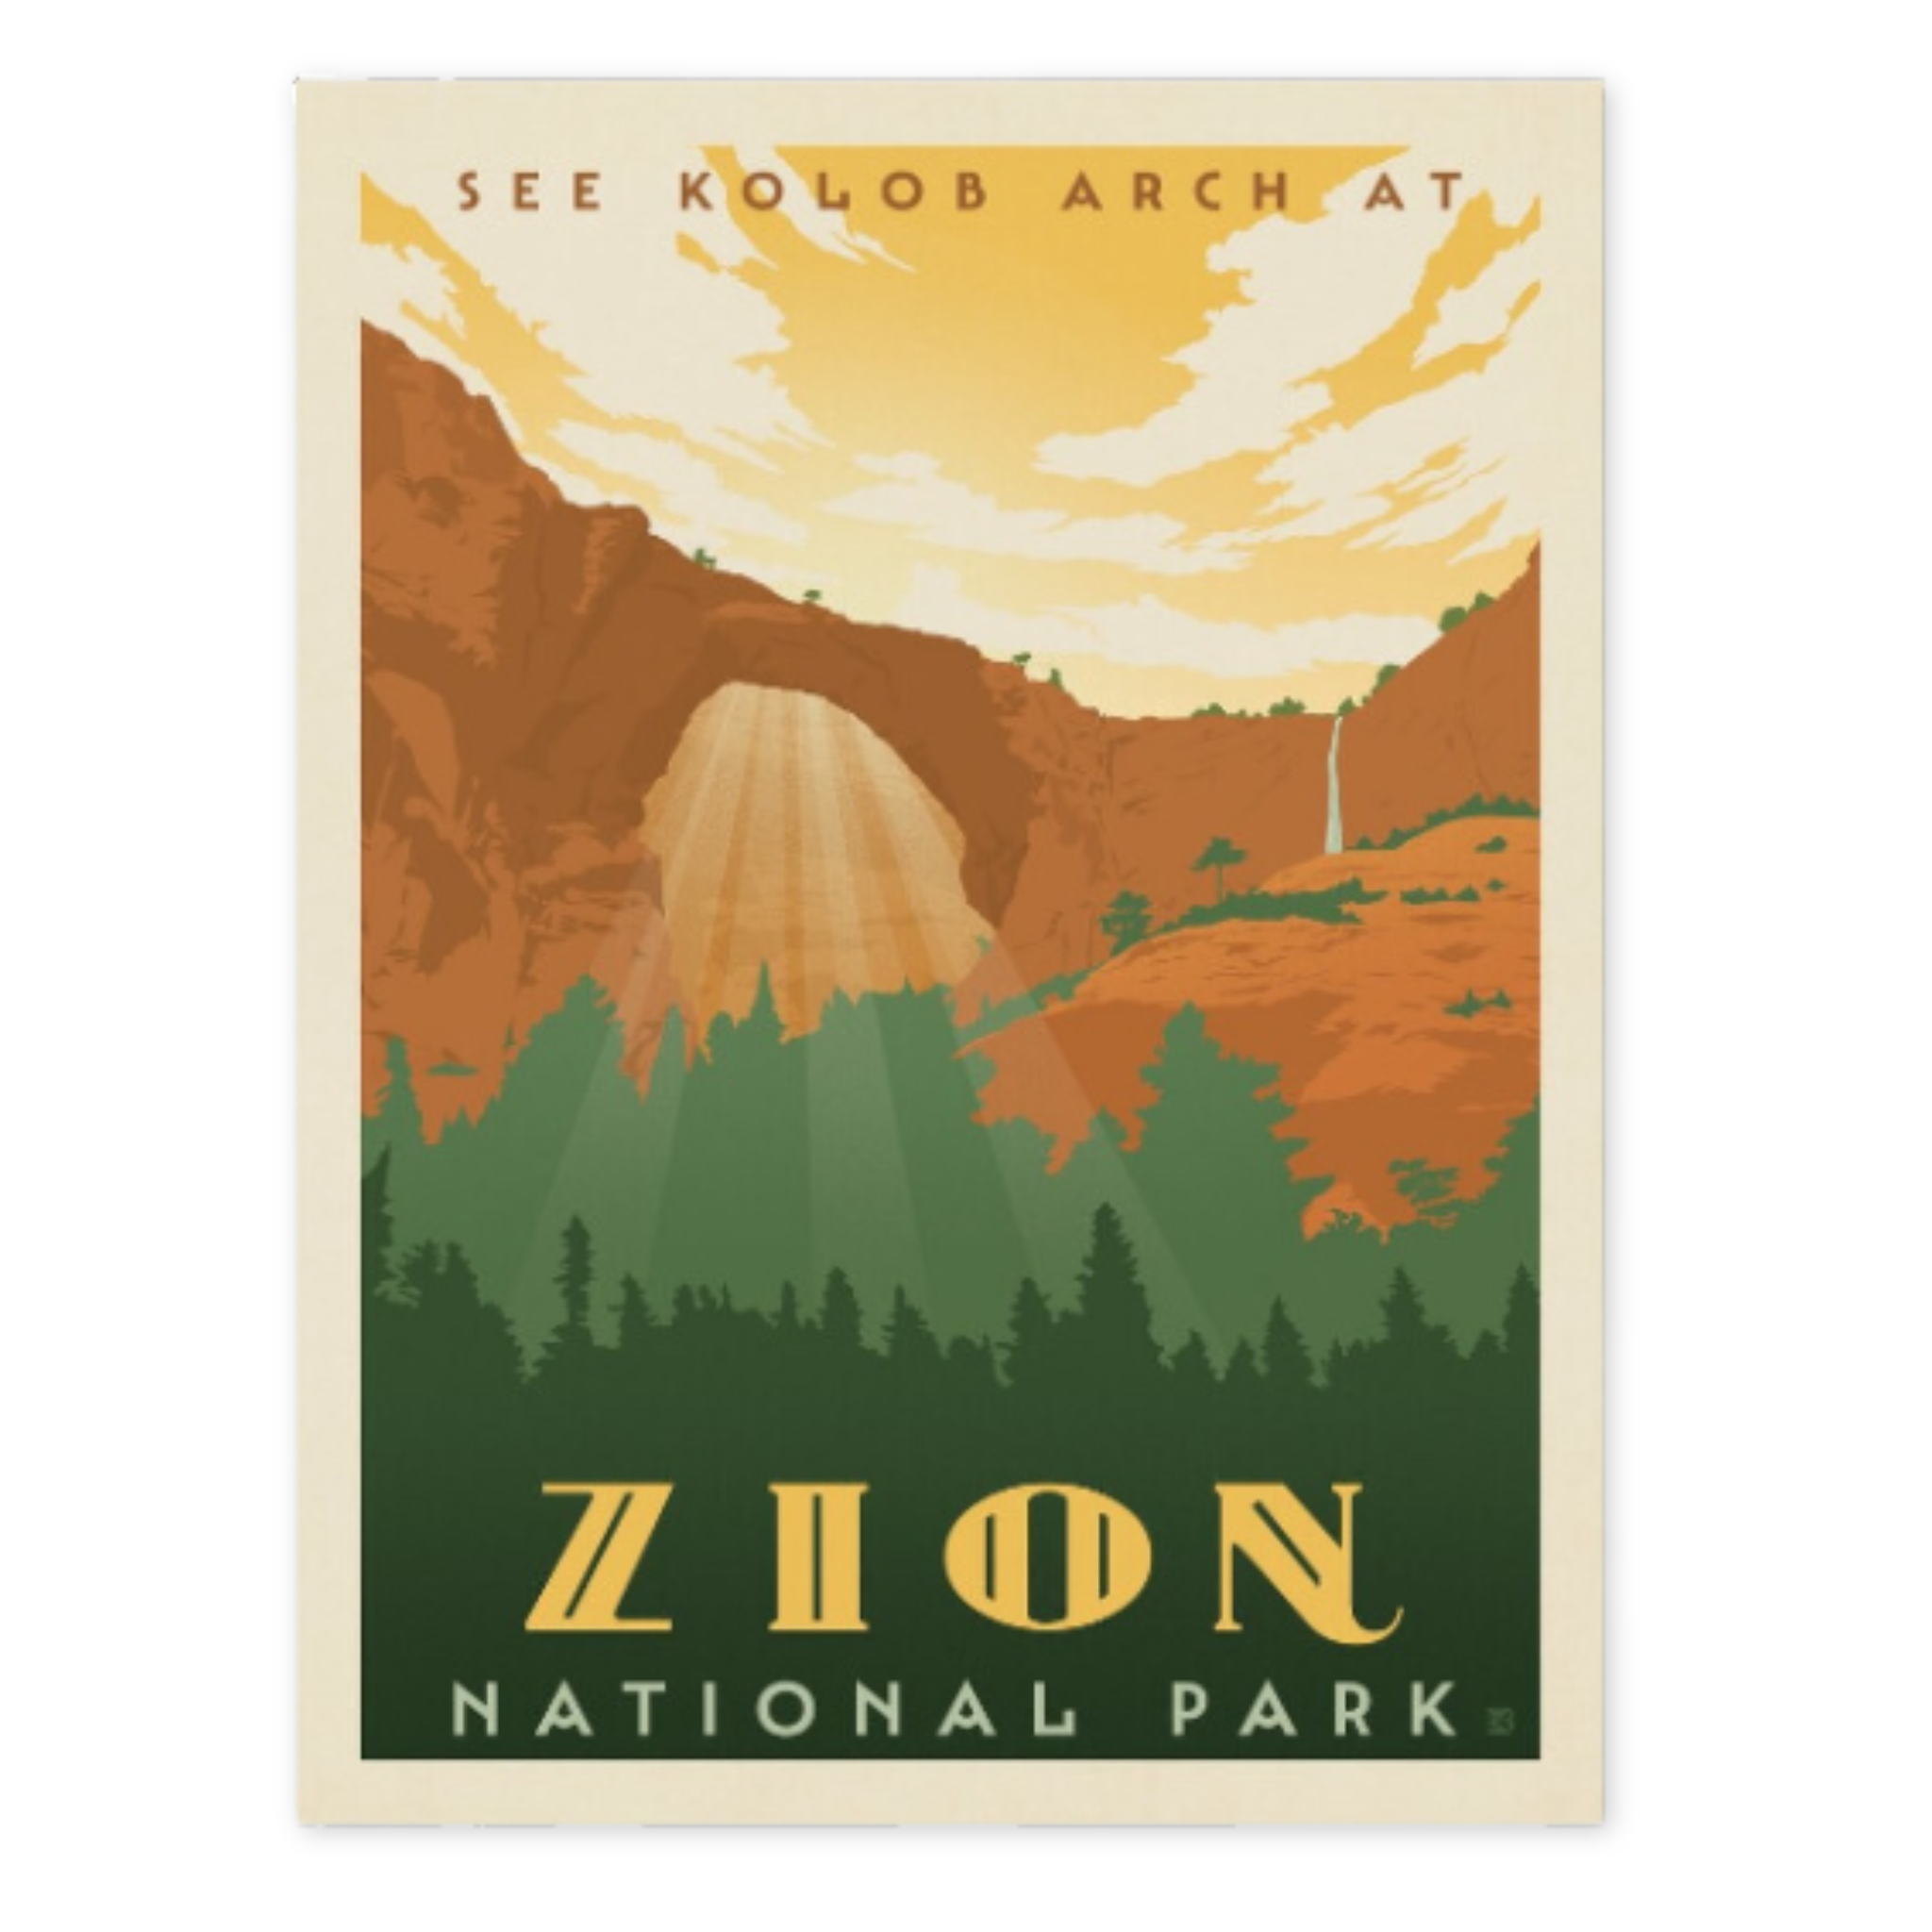 print of zion national park with an image of kolob arch